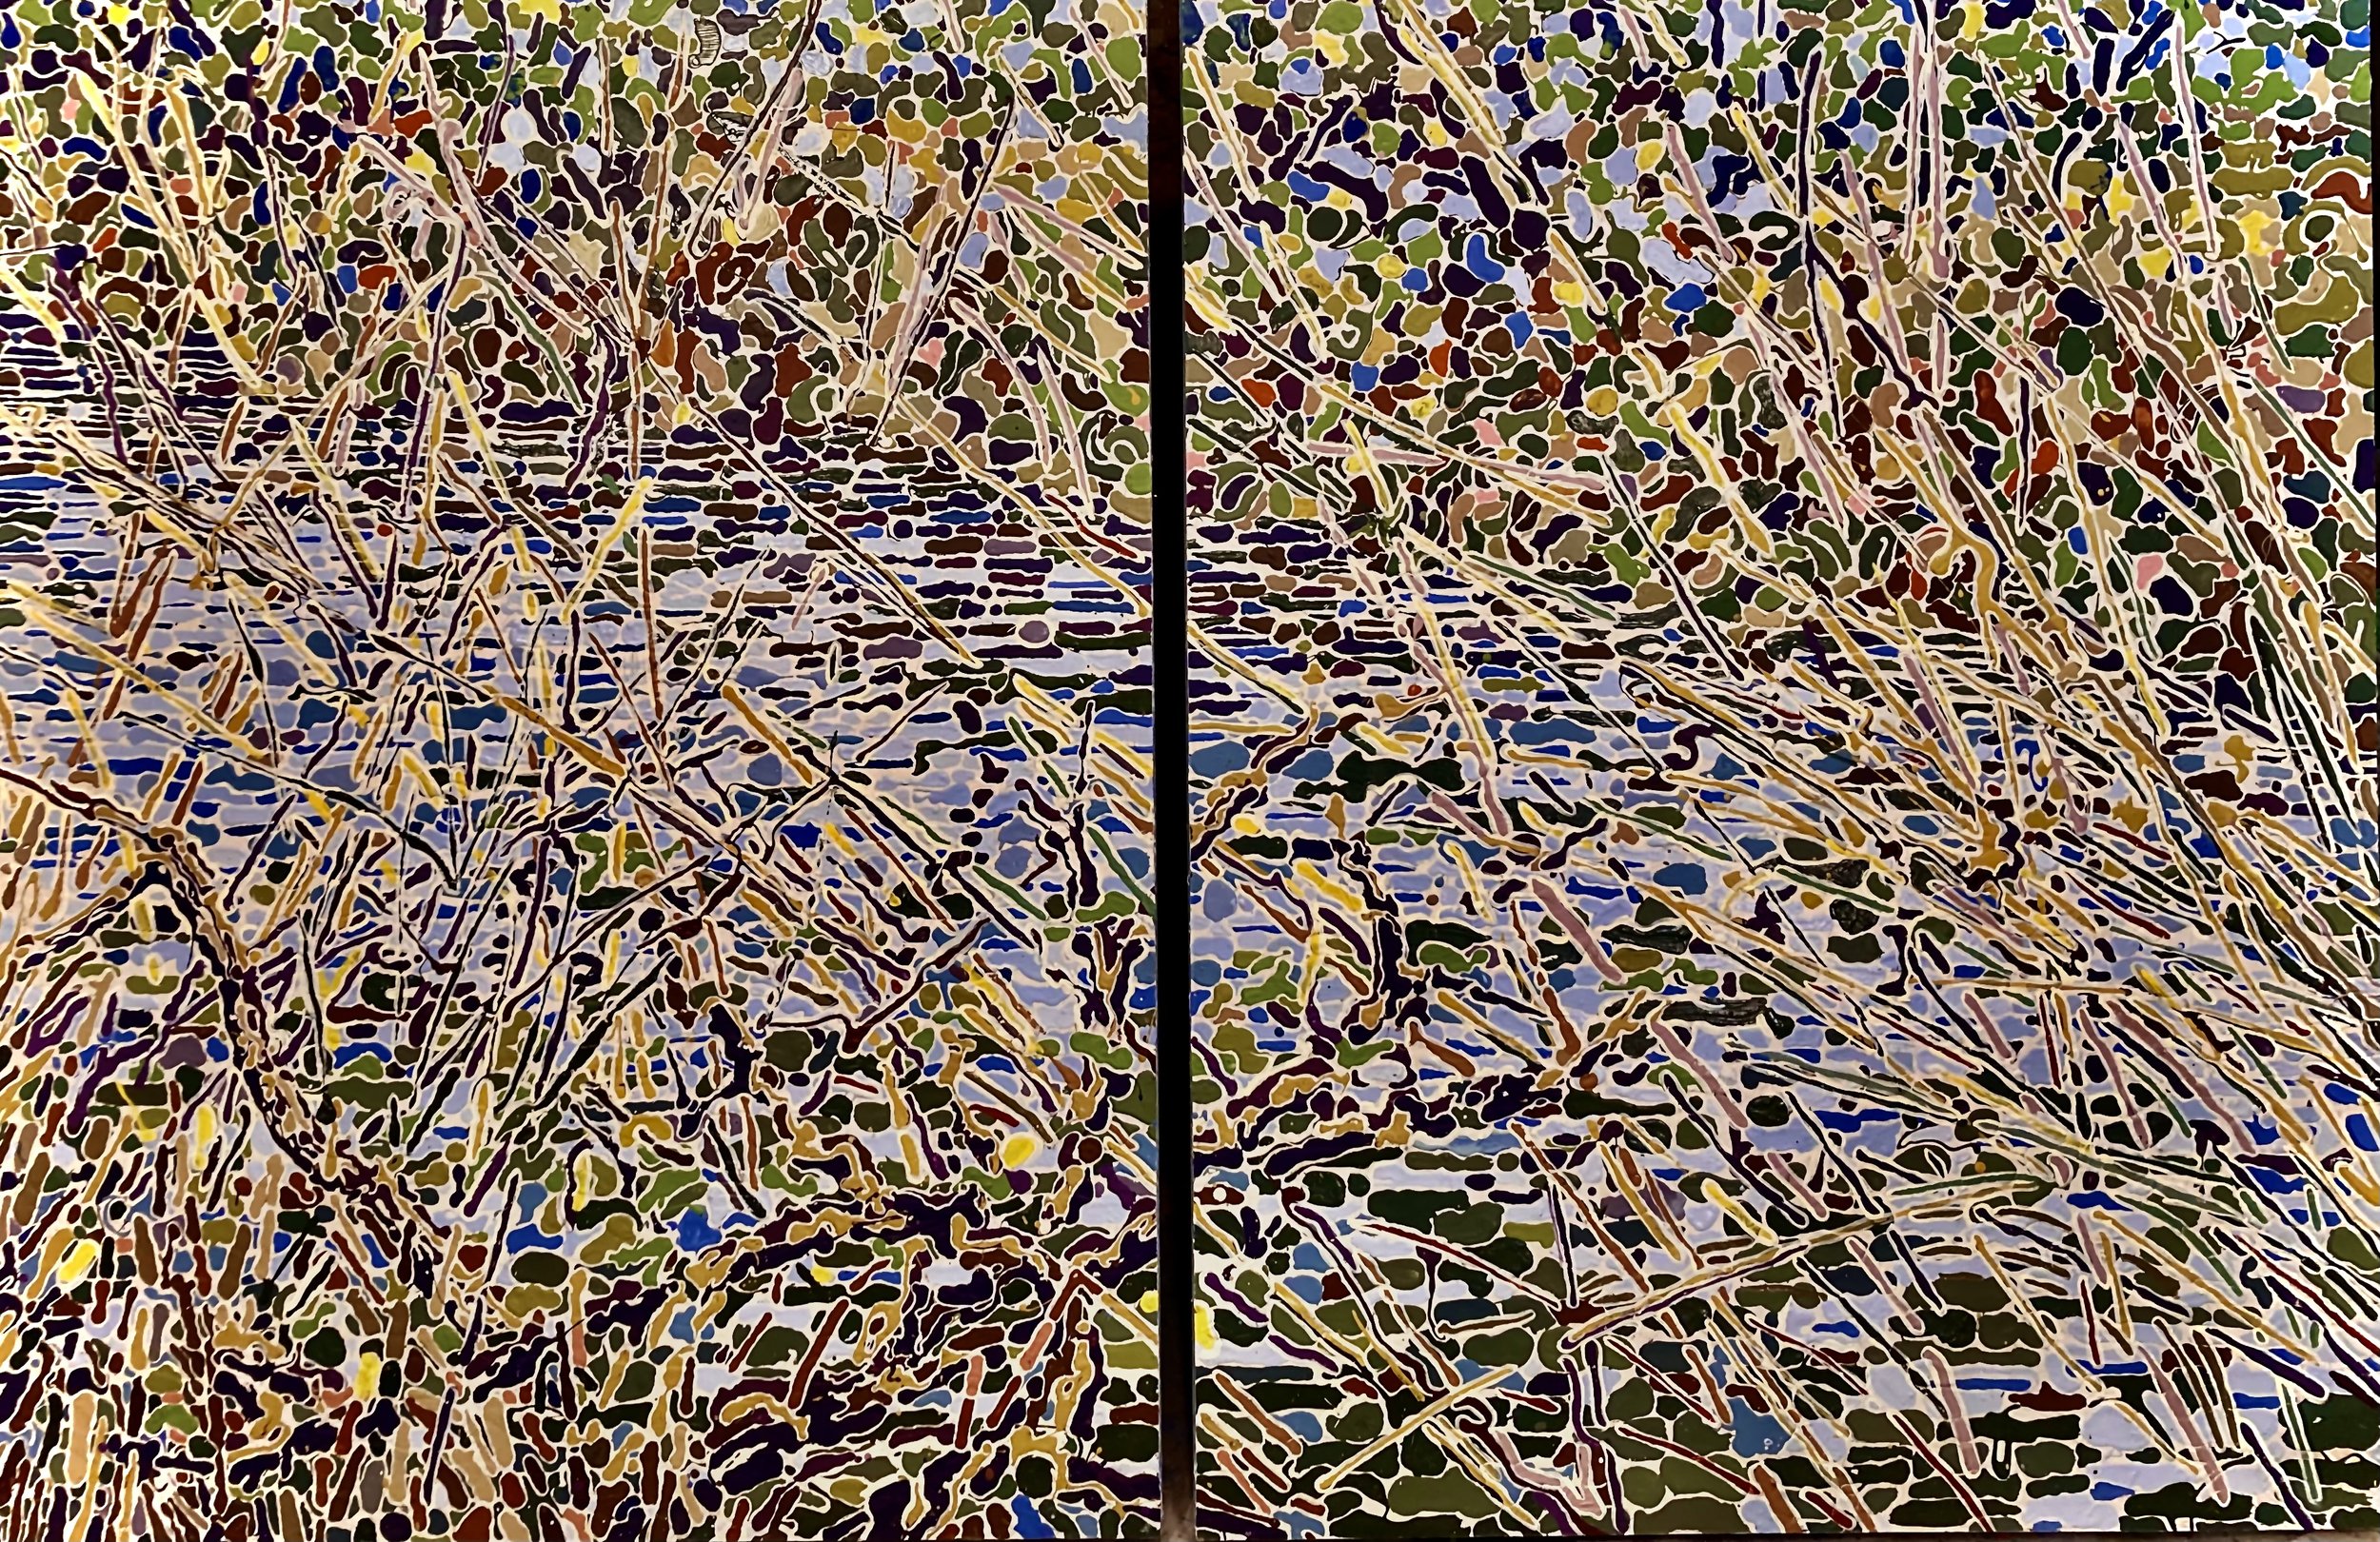 33A. River Diptych.